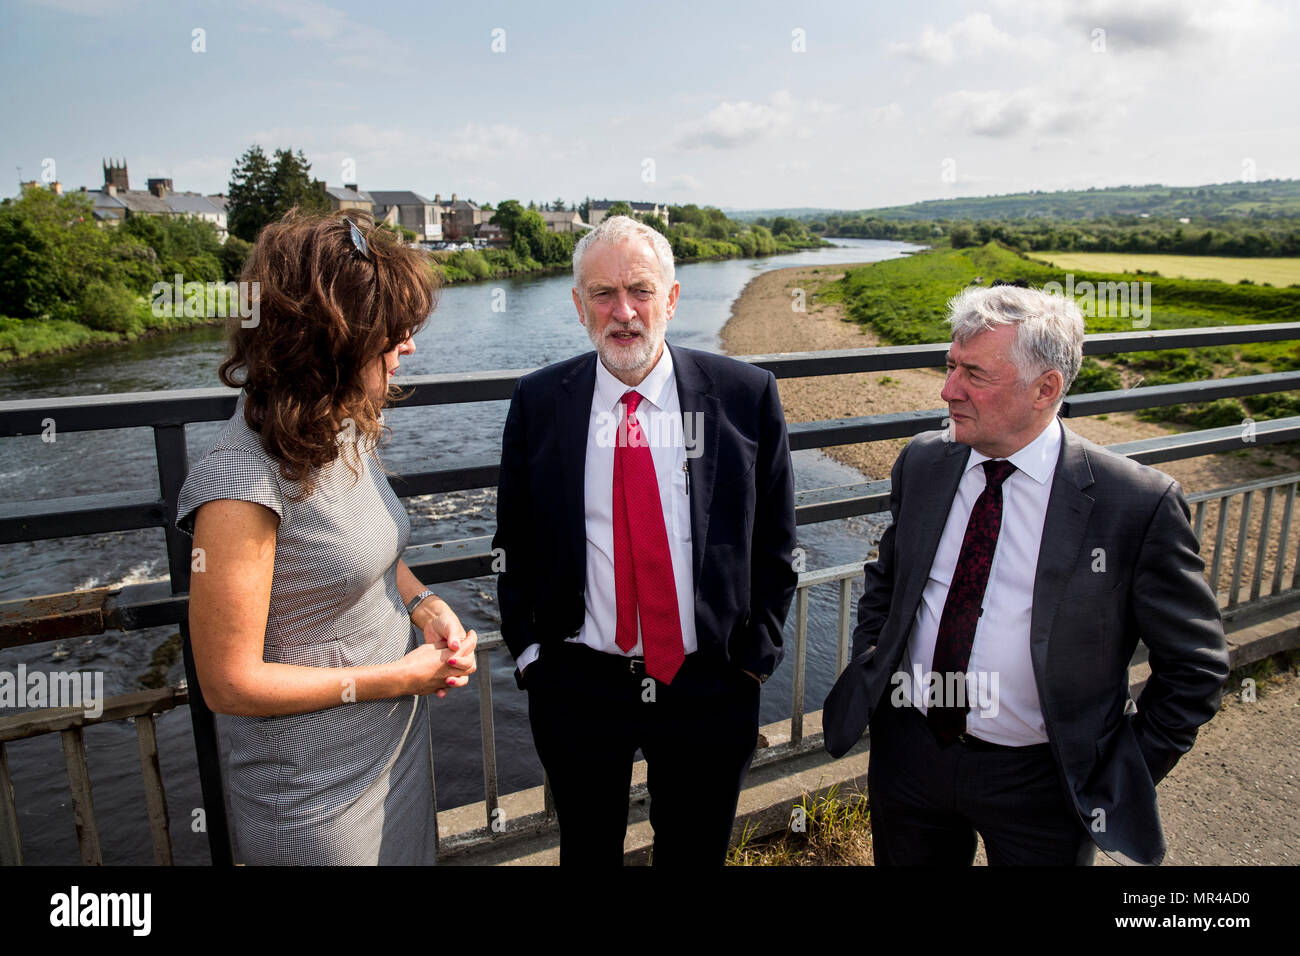 Labour leader Jeremy Corbyn with Professor Deirdre Heenan (left) and Shadow Secretary of State for Northern Ireland Tony Lloyd (right) during a visit to Lifford Bridge on the Irish border, while the country goes to the polls to vote in the referendum on the 8th Amendment of the Irish Constitution. Stock Photo